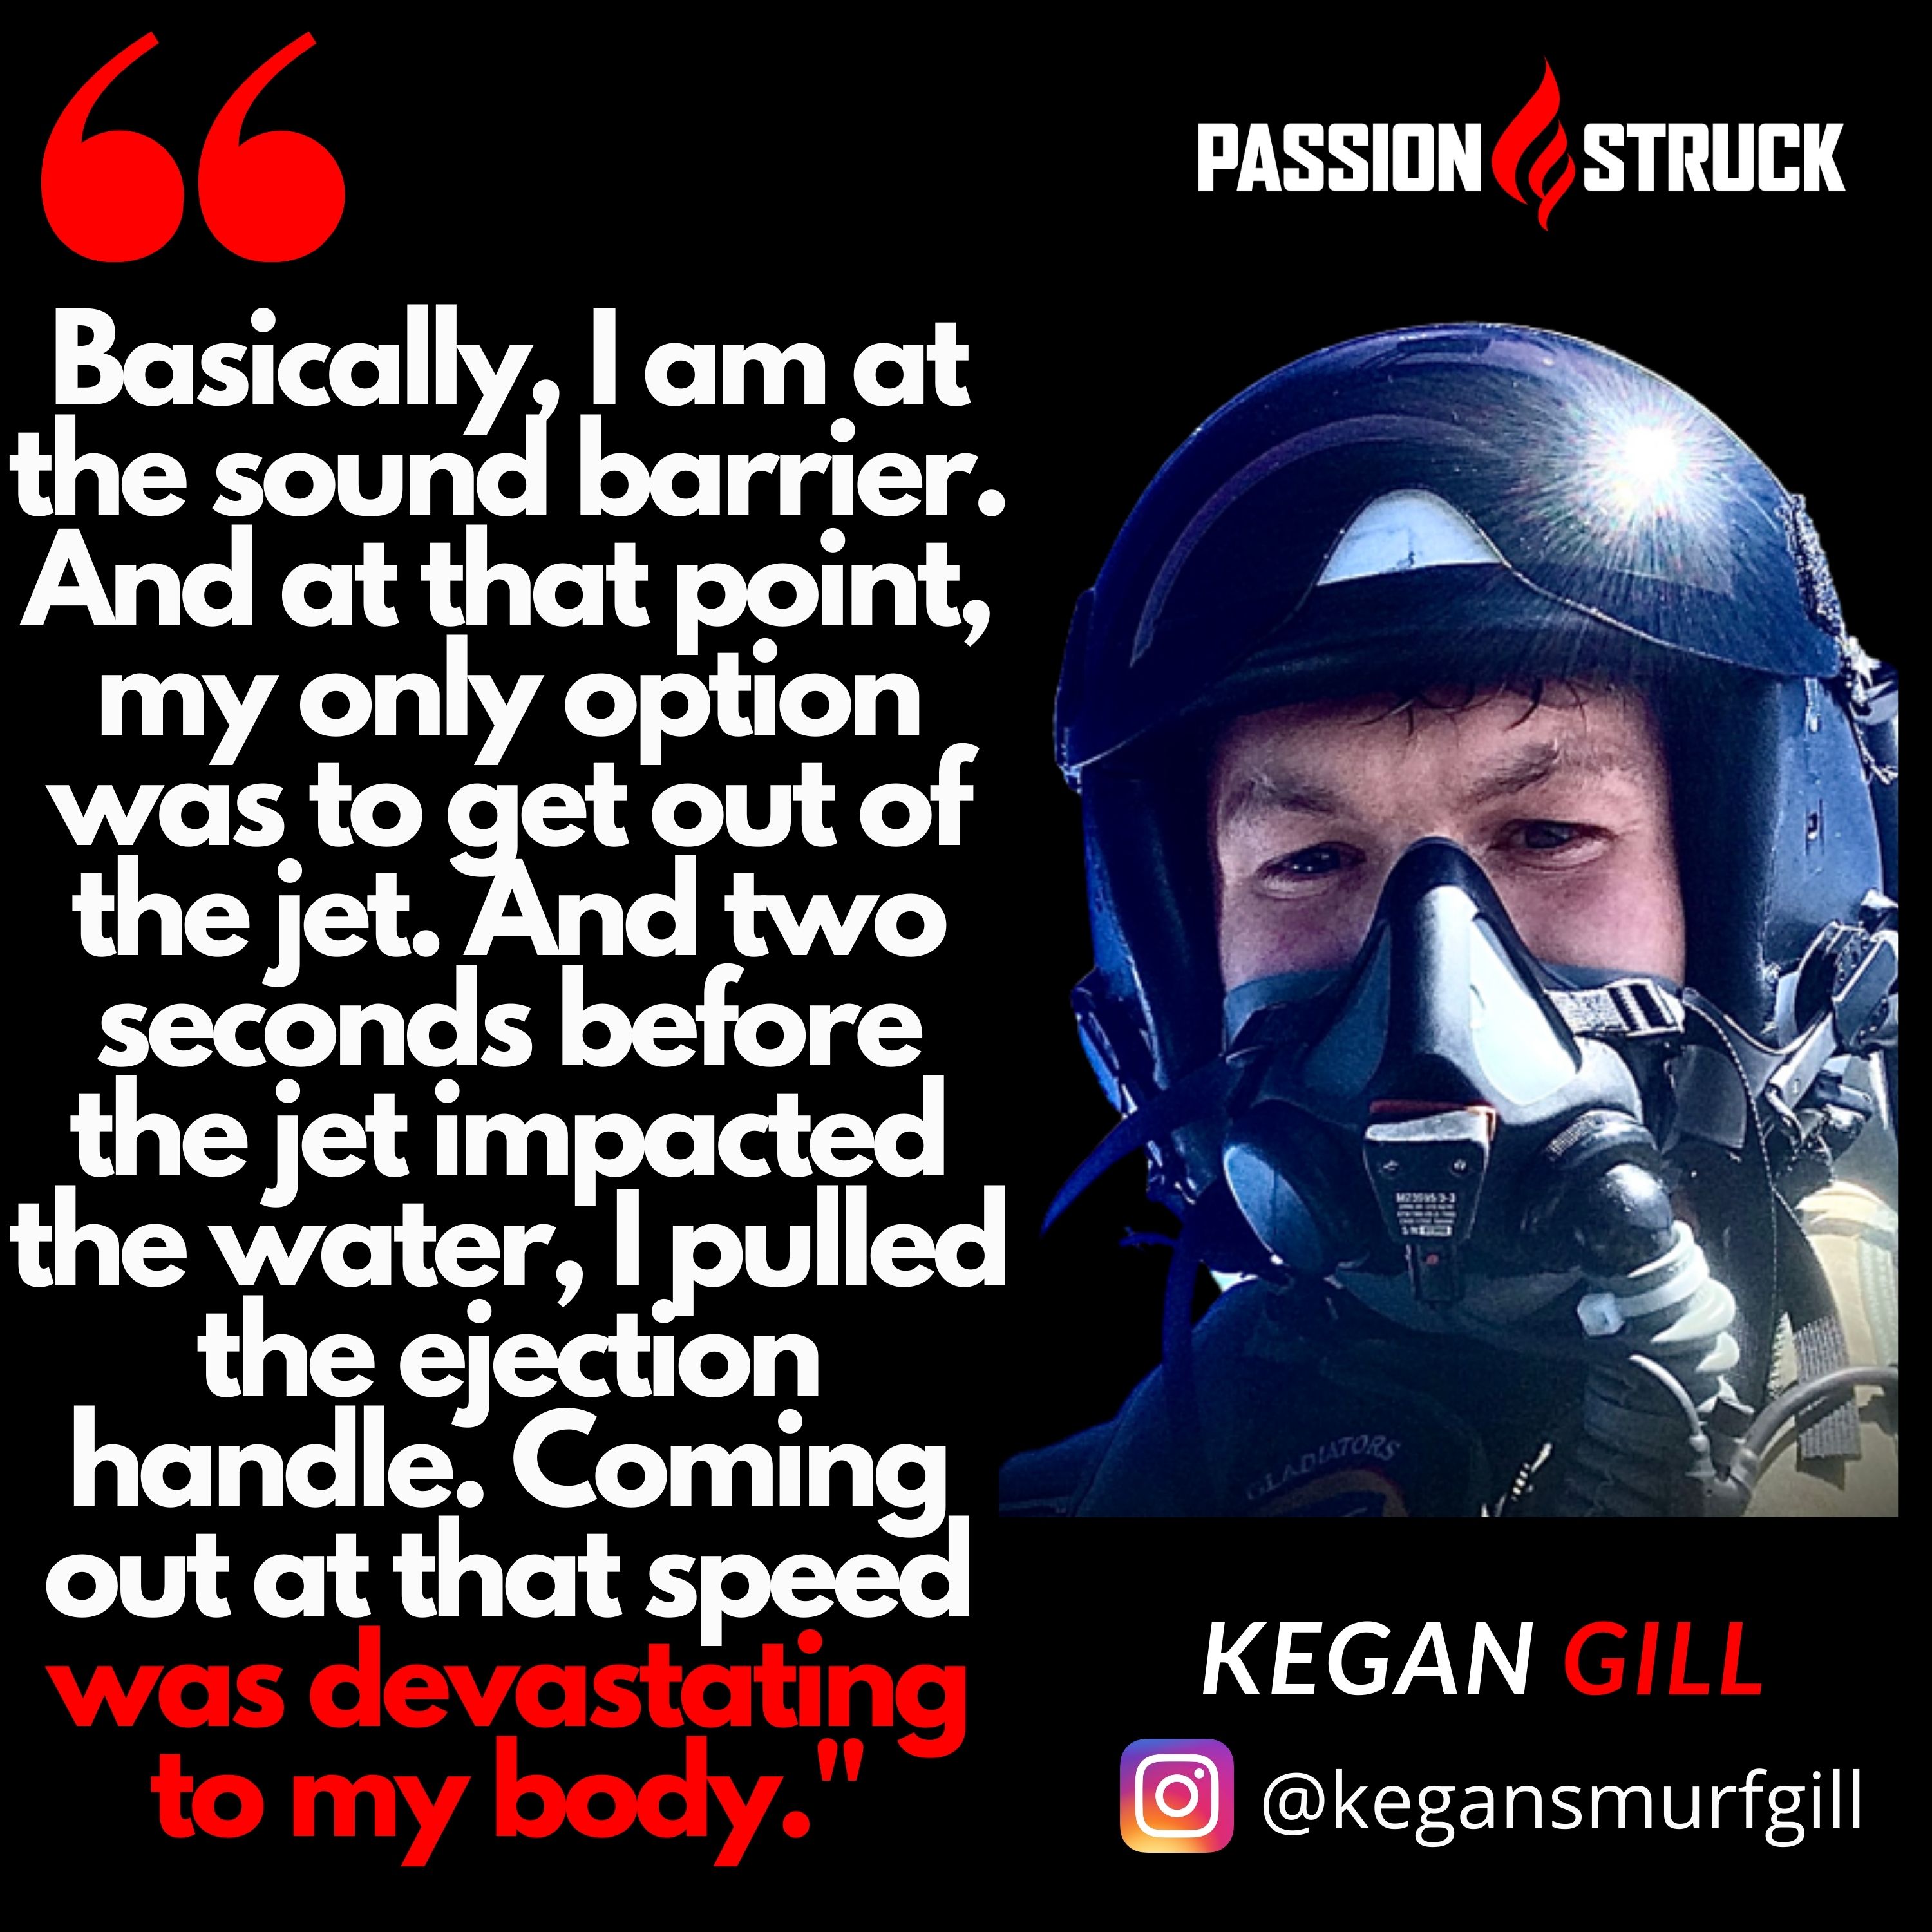 Quote by Kegan Gill about ejecting from his F-18 at the speed of sound for passion struck podcast